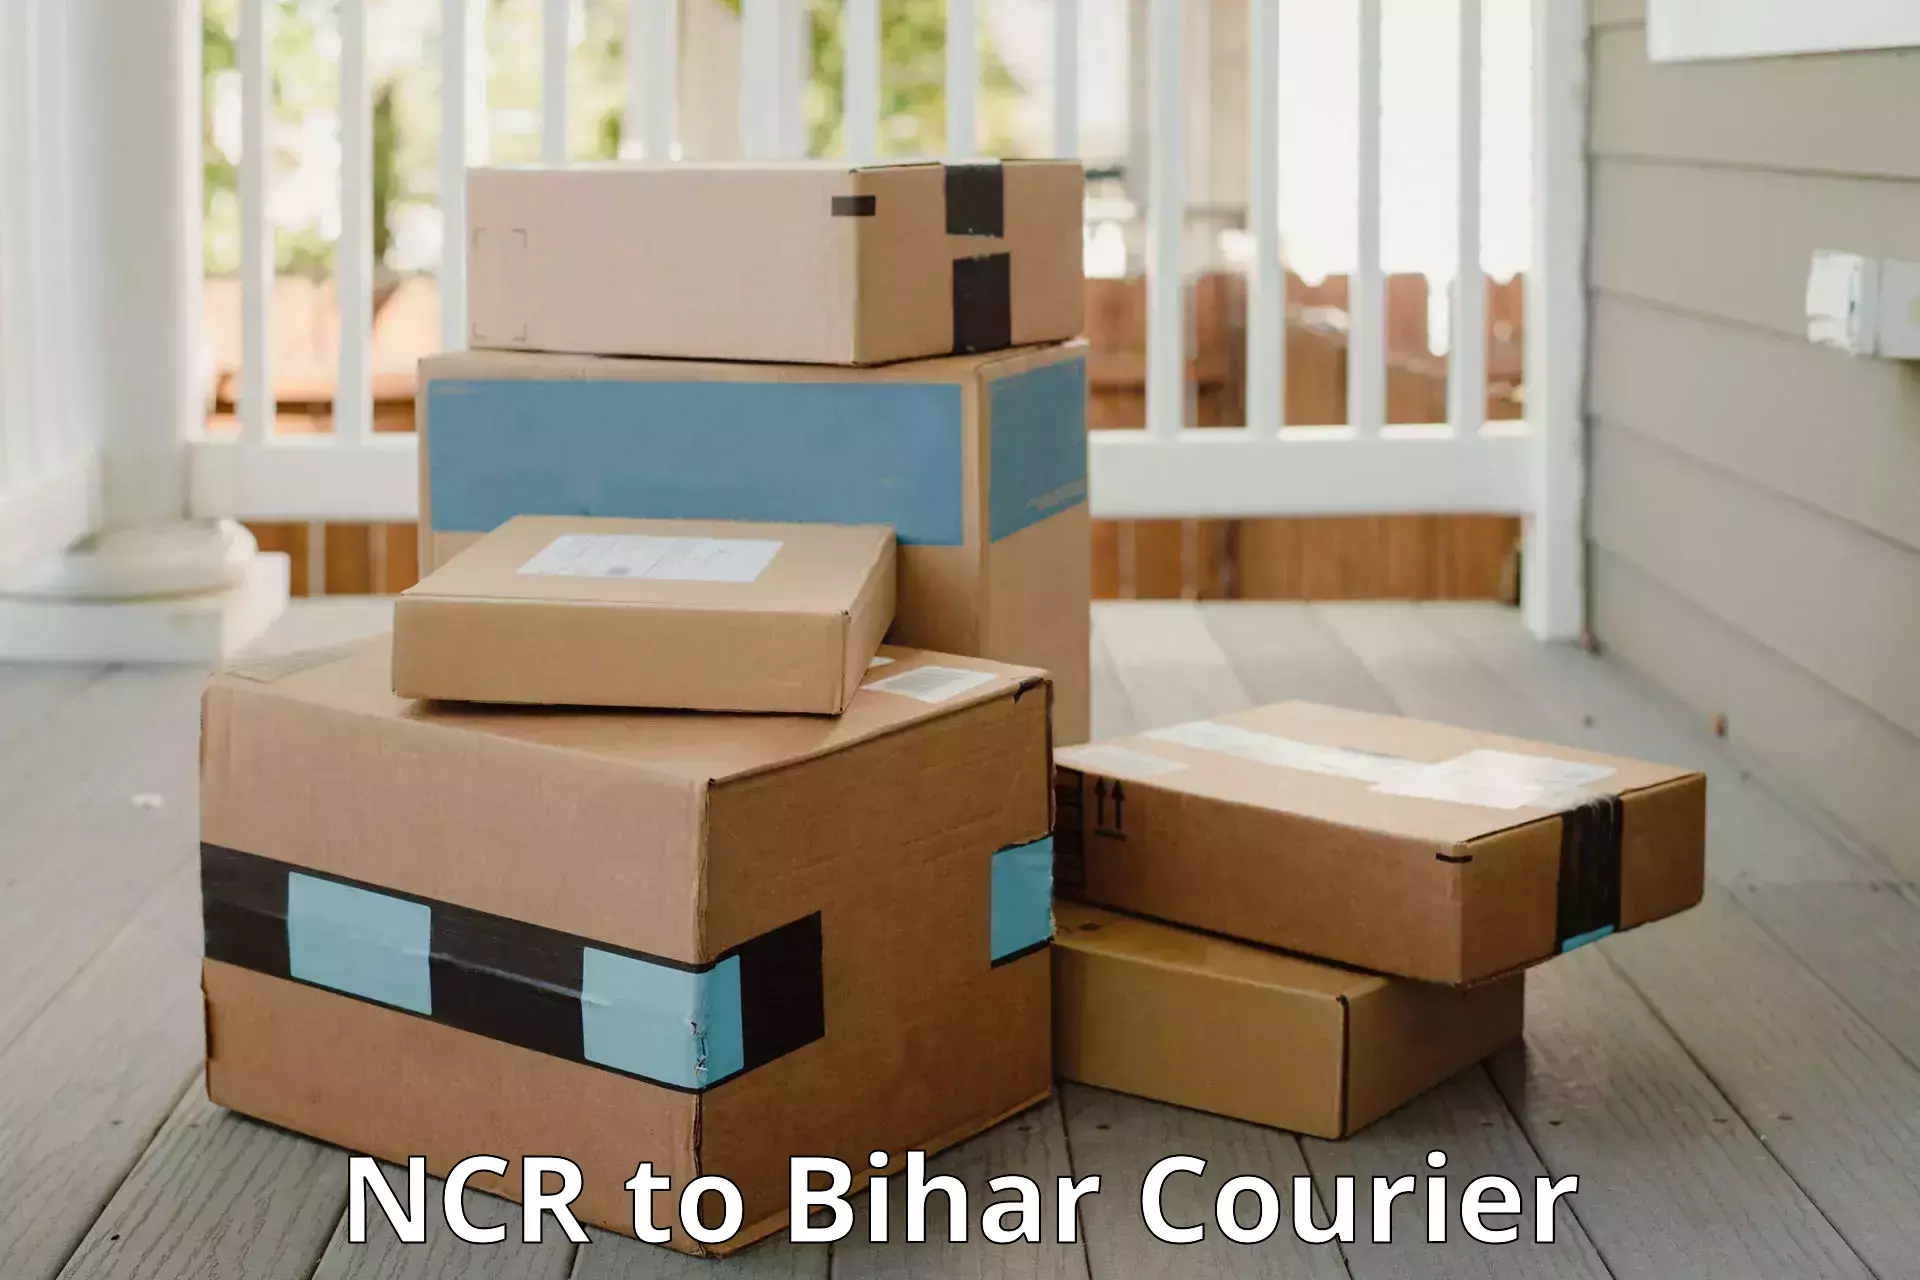 Luggage delivery app NCR to Dhaka